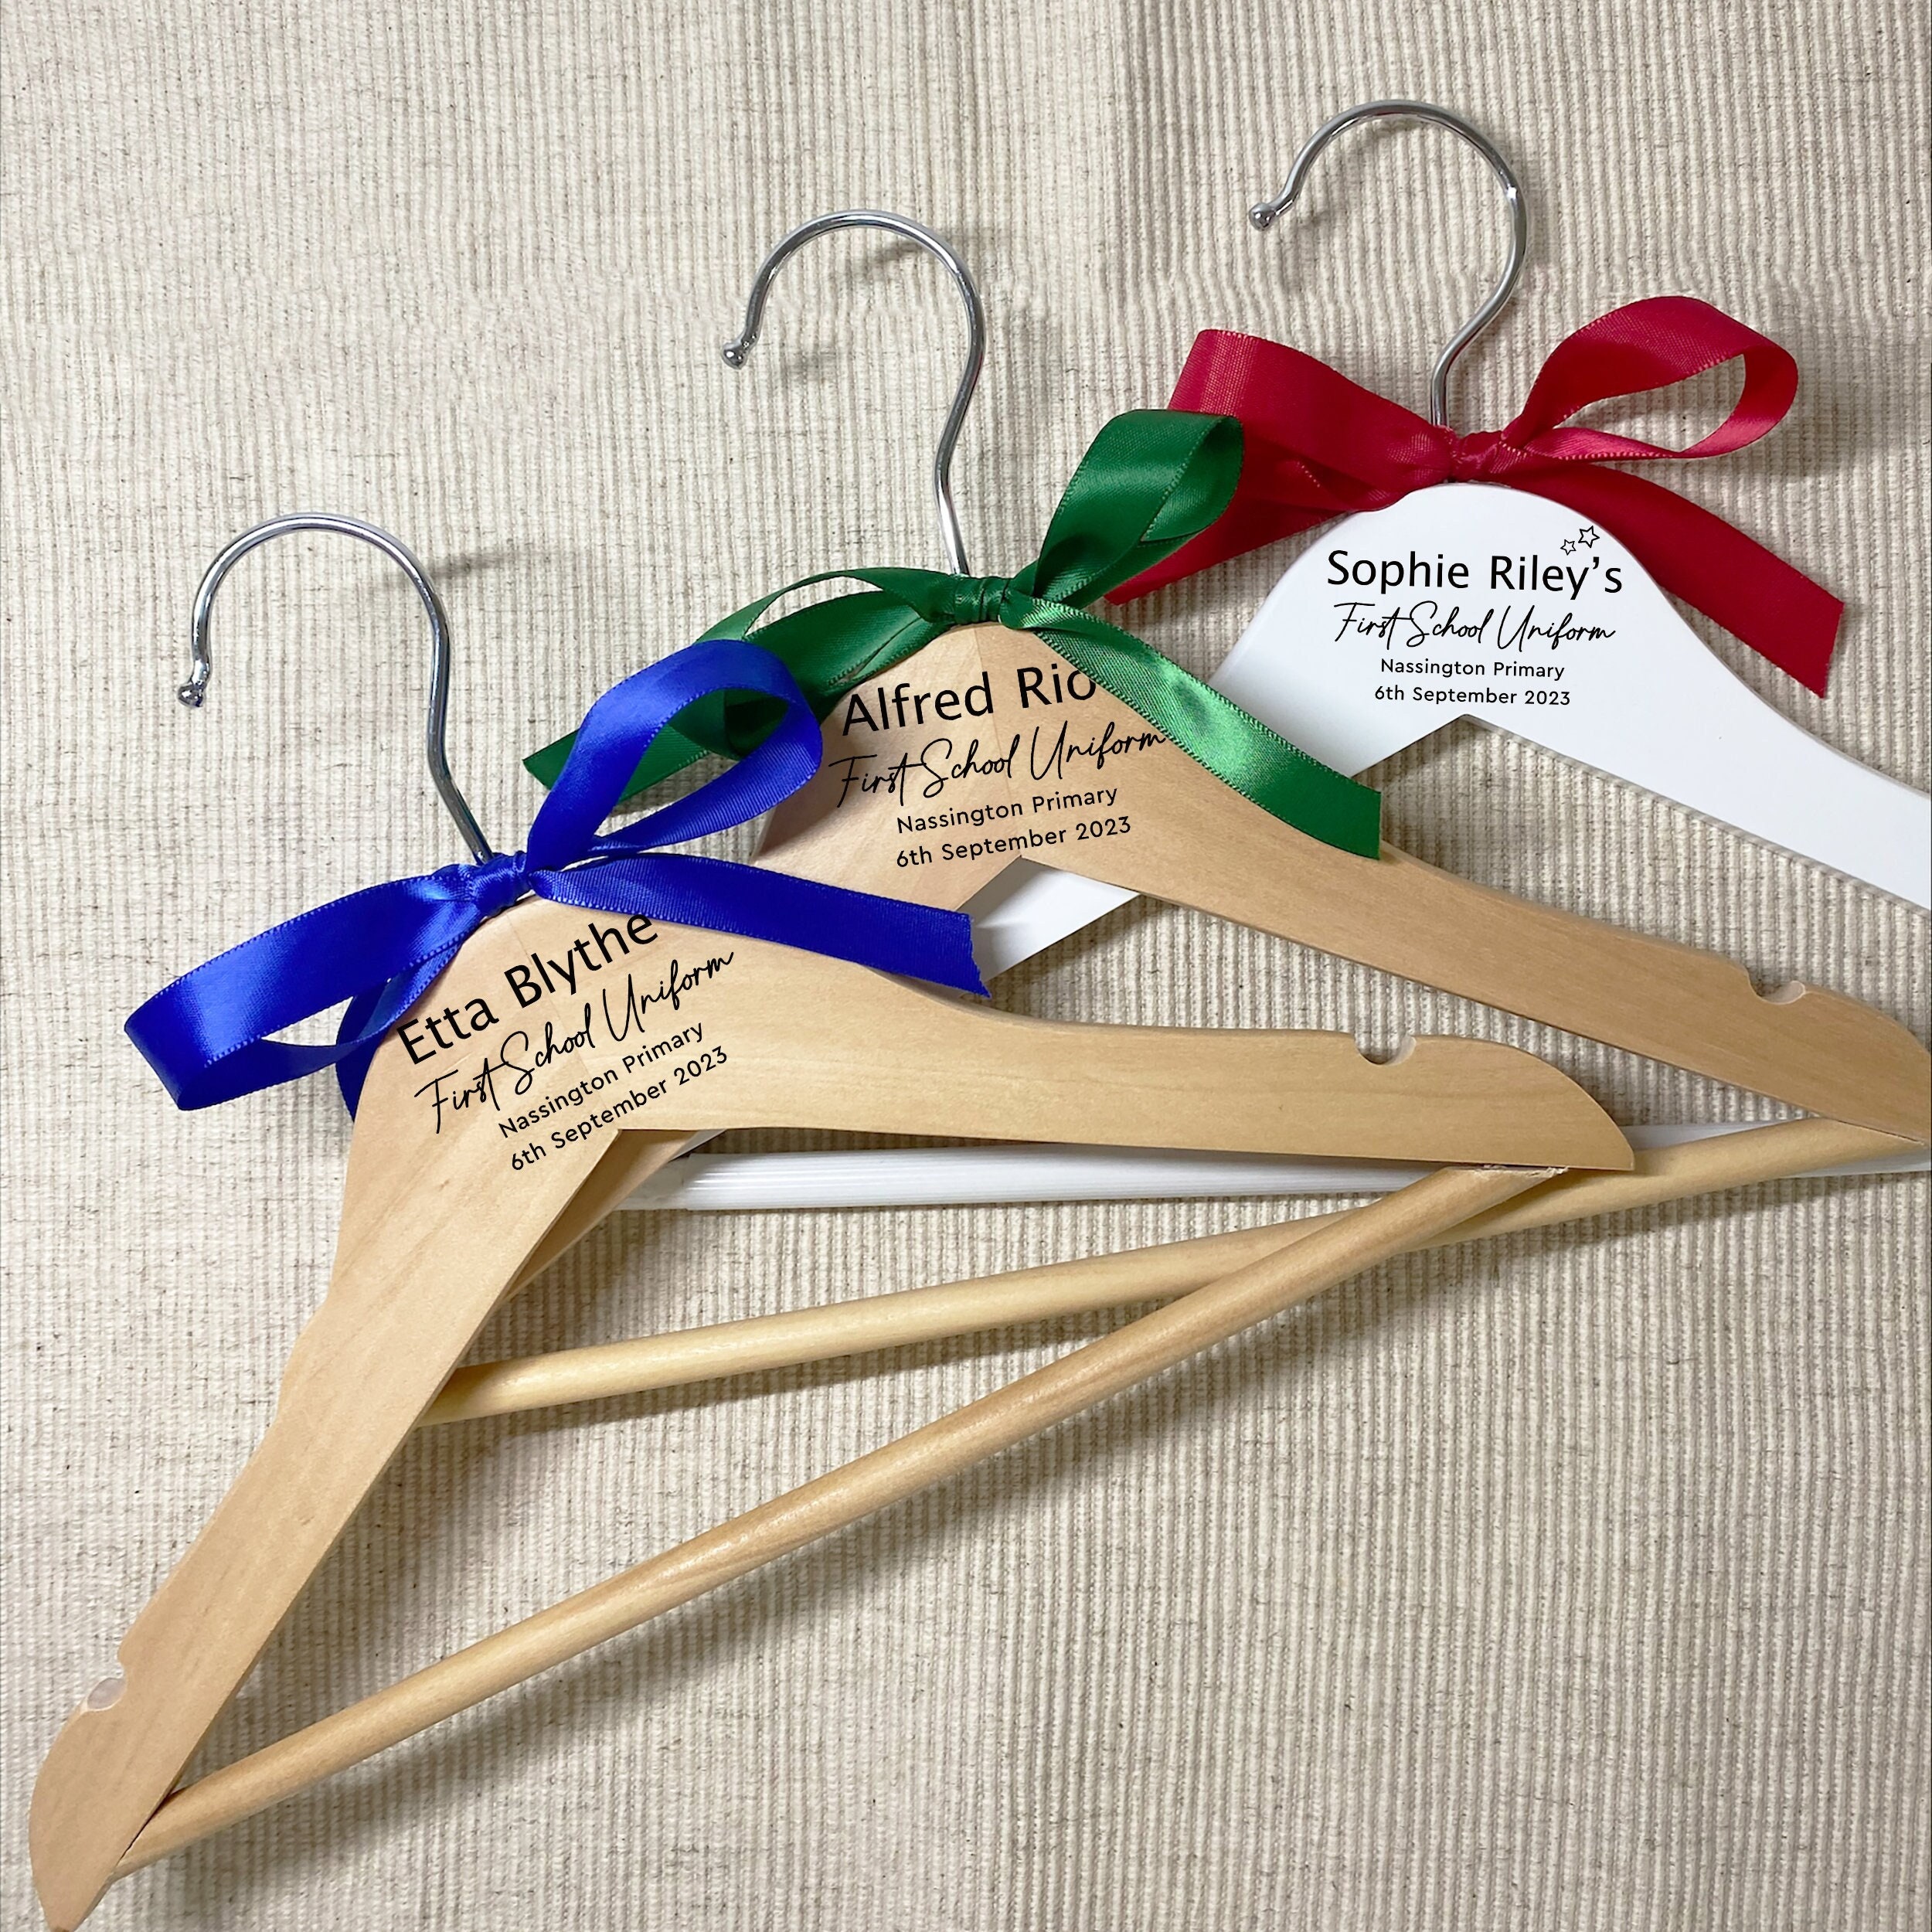 Personalised Hangers, Personalised Clothes Hanger, Personalised Baby  Hanger, Child Coats Hanger, Kids Coat Hangers, Baby Hangers - any name